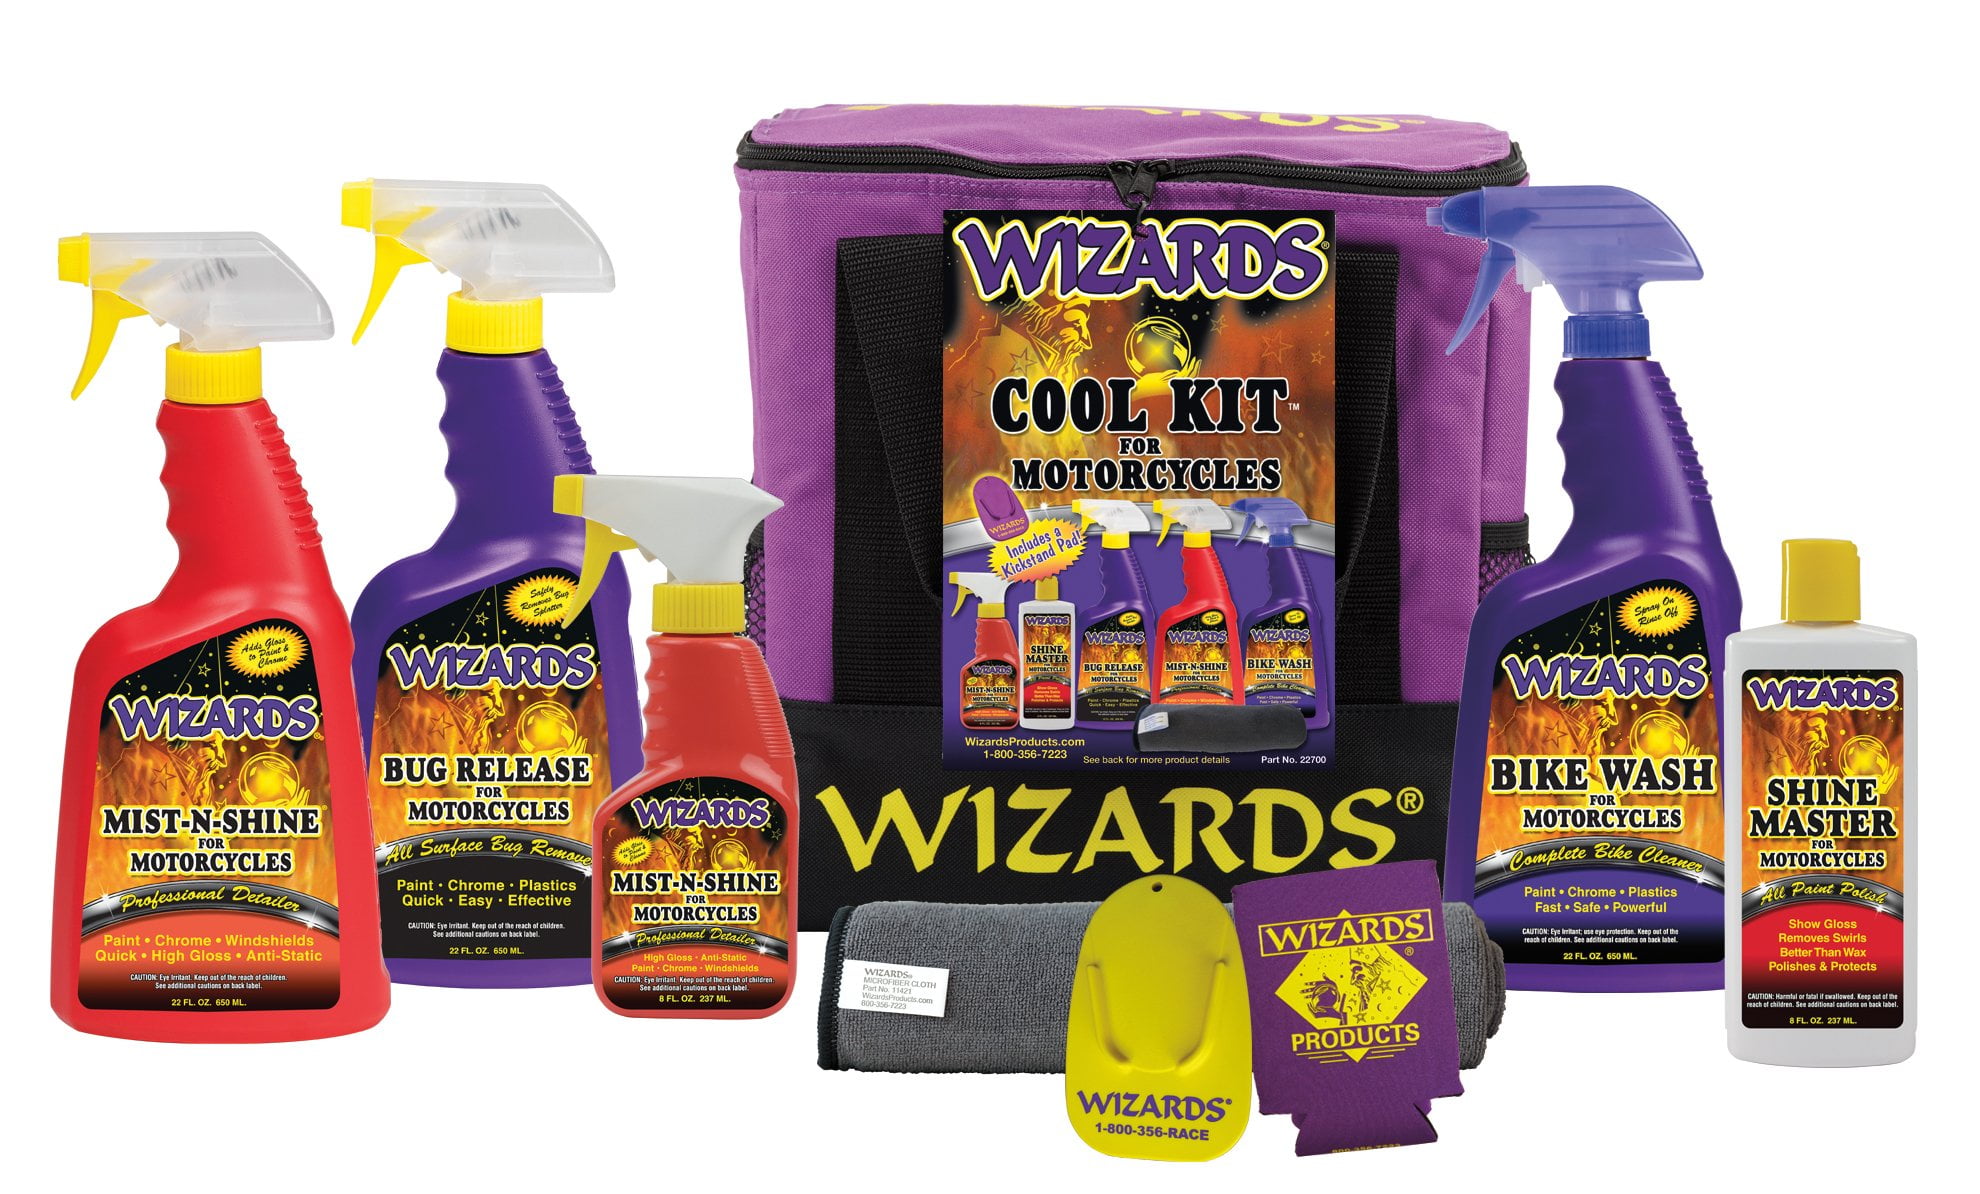 Wizards Motorcycle Cleaner Kits - 8 Piece Motorcycle Cool Kit